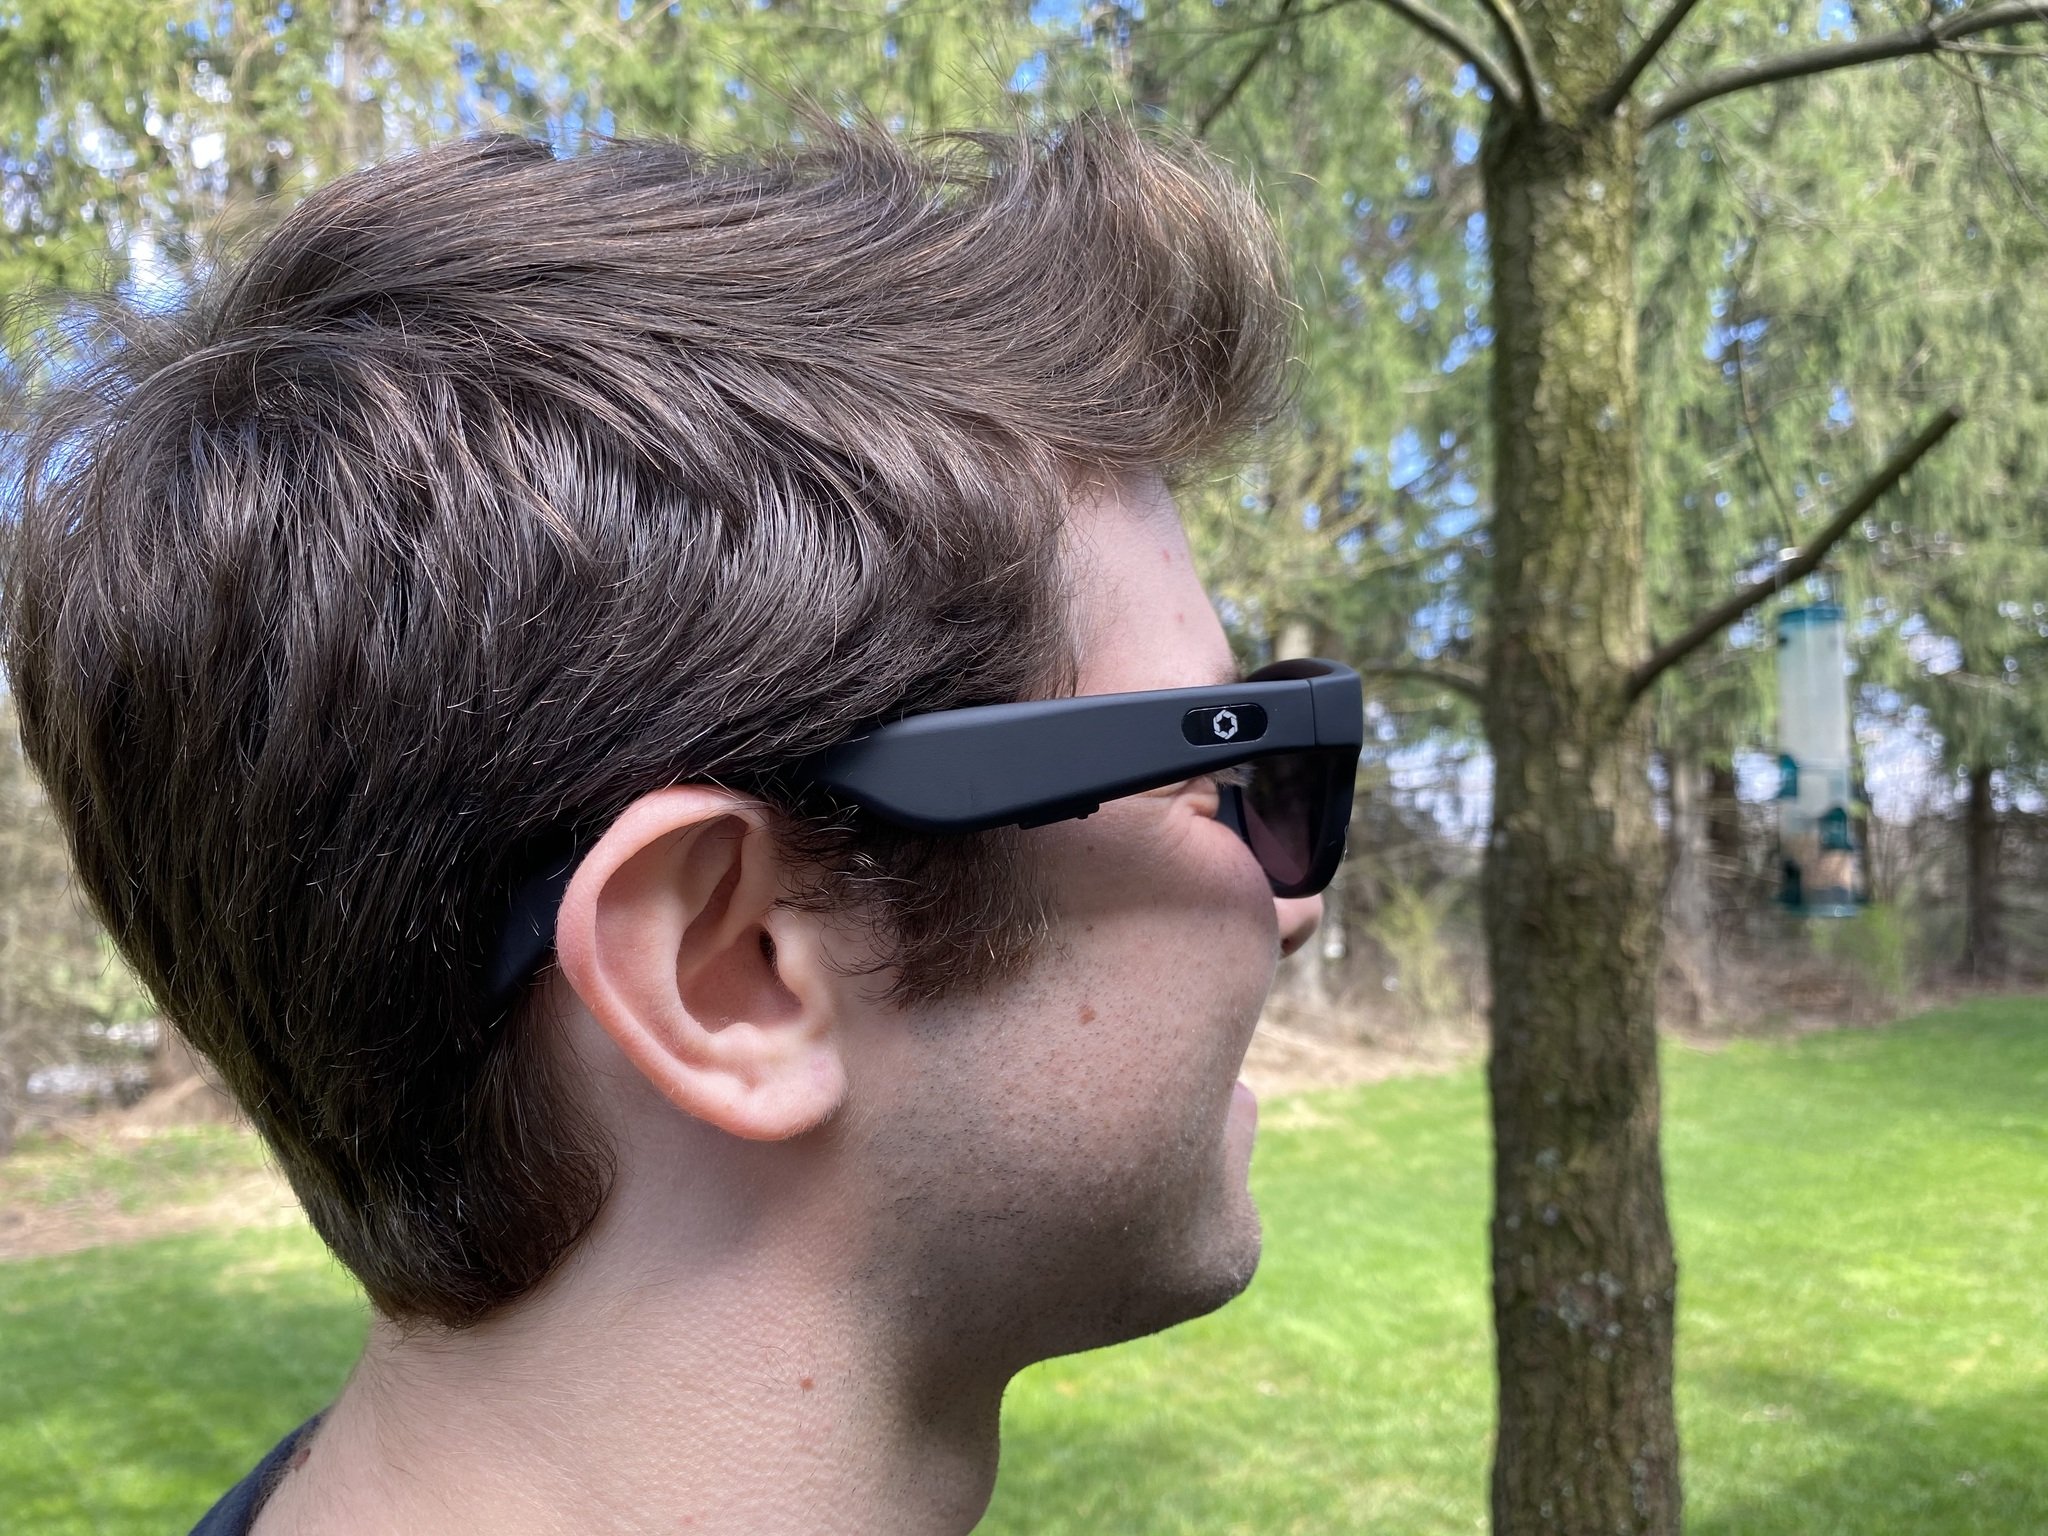 Lucyd Loud Bluetooth-Enabled Sunglasses on man